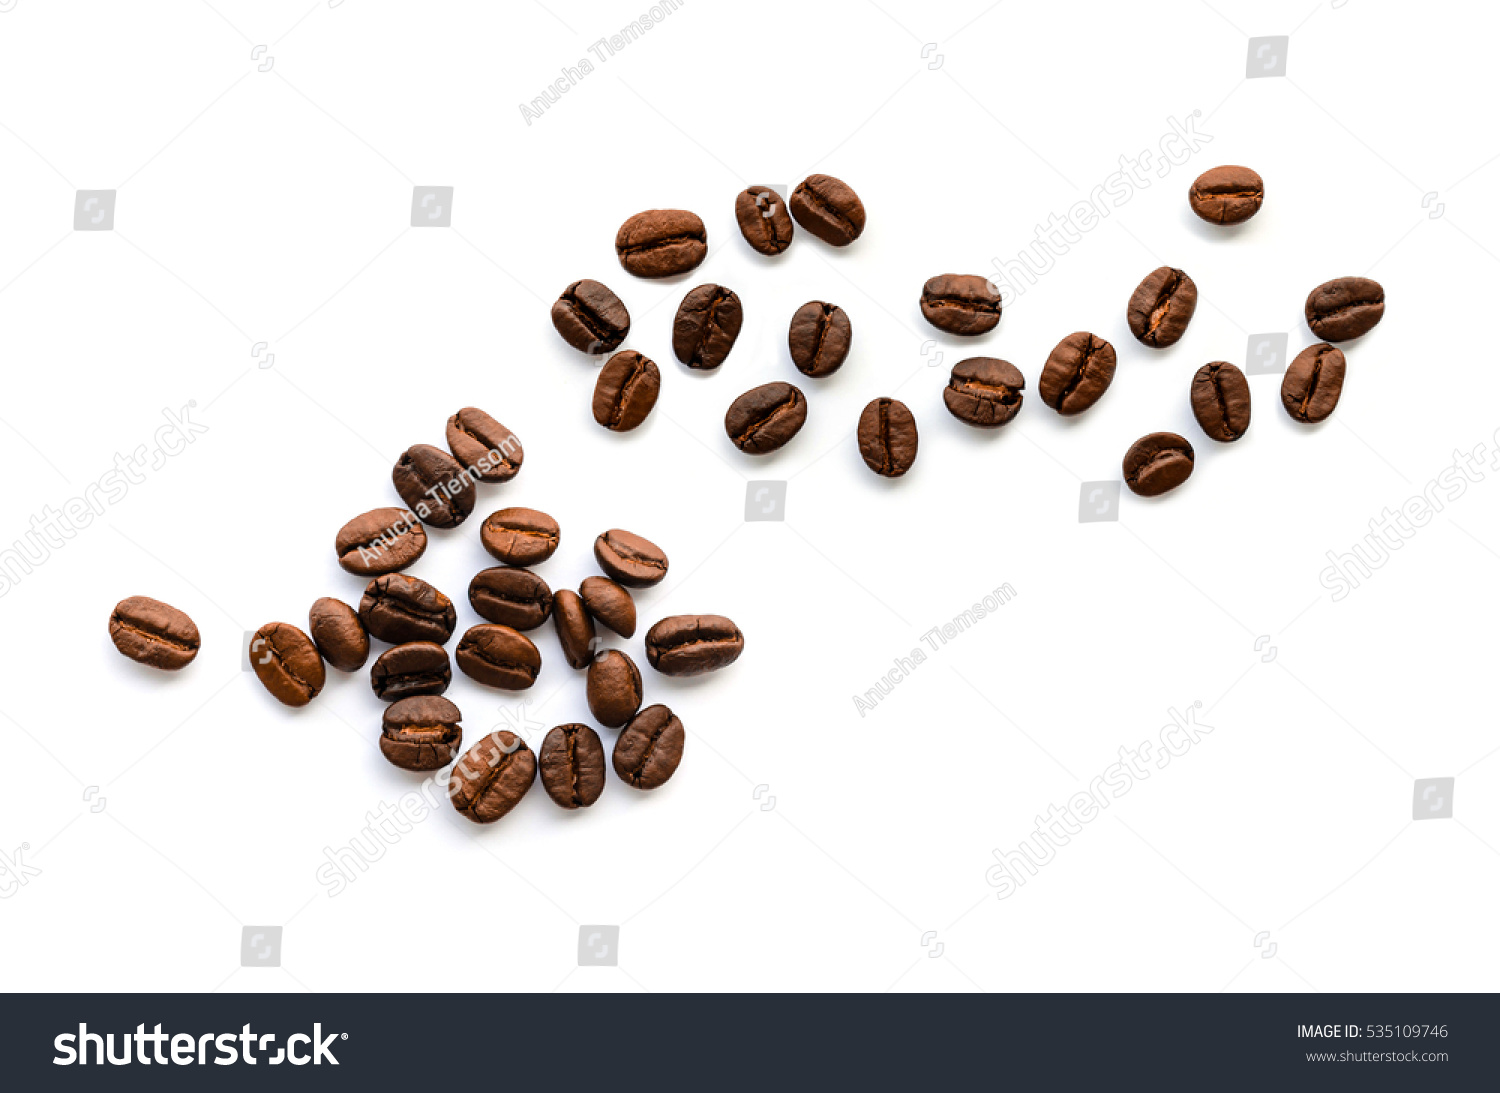 Coffee beans. Isolated on a white background. #535109746